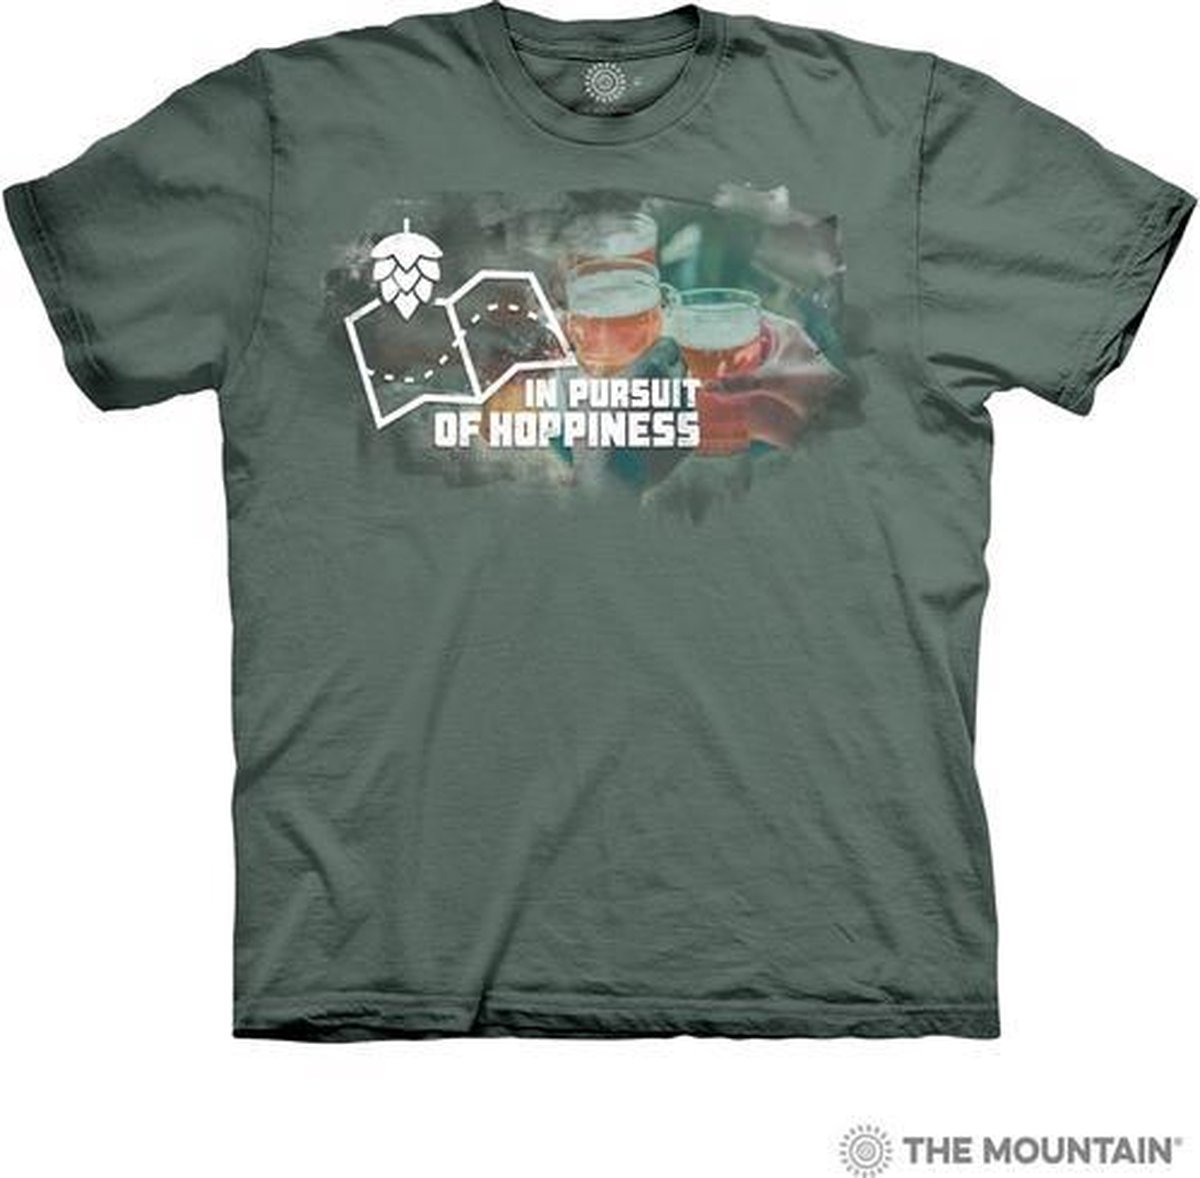 The Mountain Adult Unisex T-Shirt - Pursuit of Hoppiness